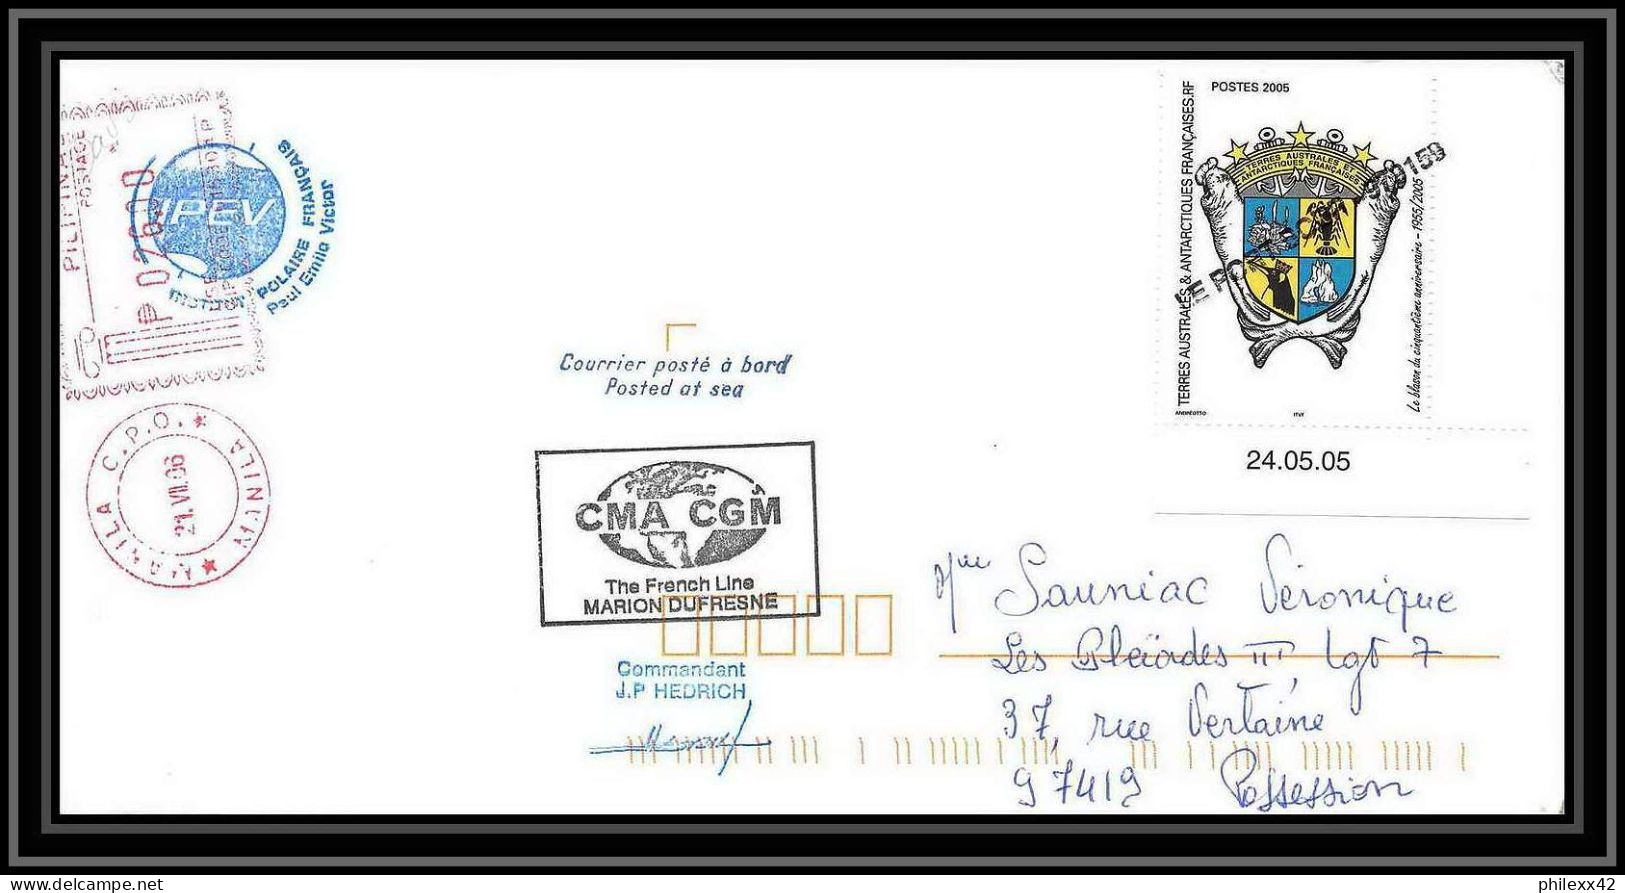 2590 ANTARCTIC Taaf Philippines Pilipinas Mixte Lettre Cover Dufresne 2 Signé Signed Md 155 Marco Polo 2 2006 - Expediciones Antárticas